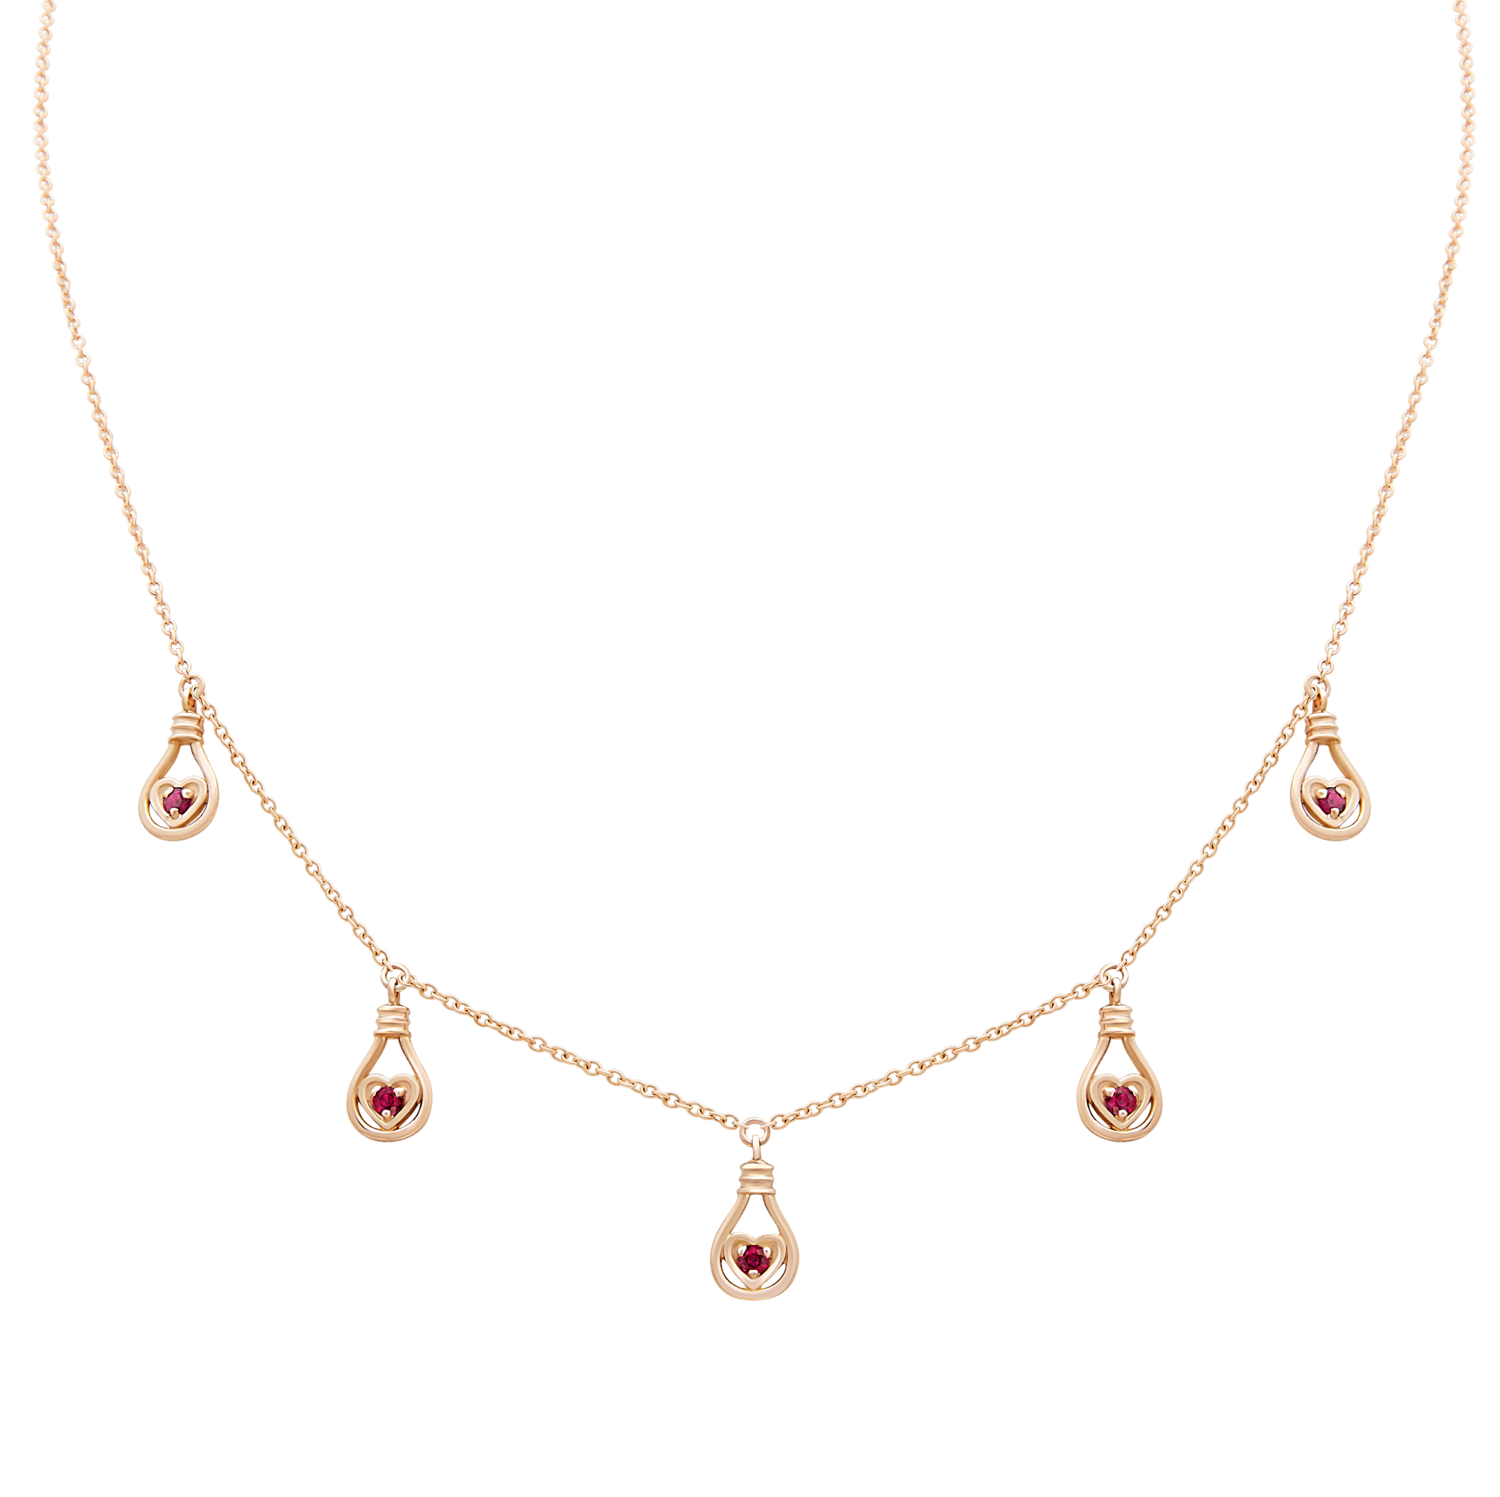 Light Gold Necklace Love with Ruby